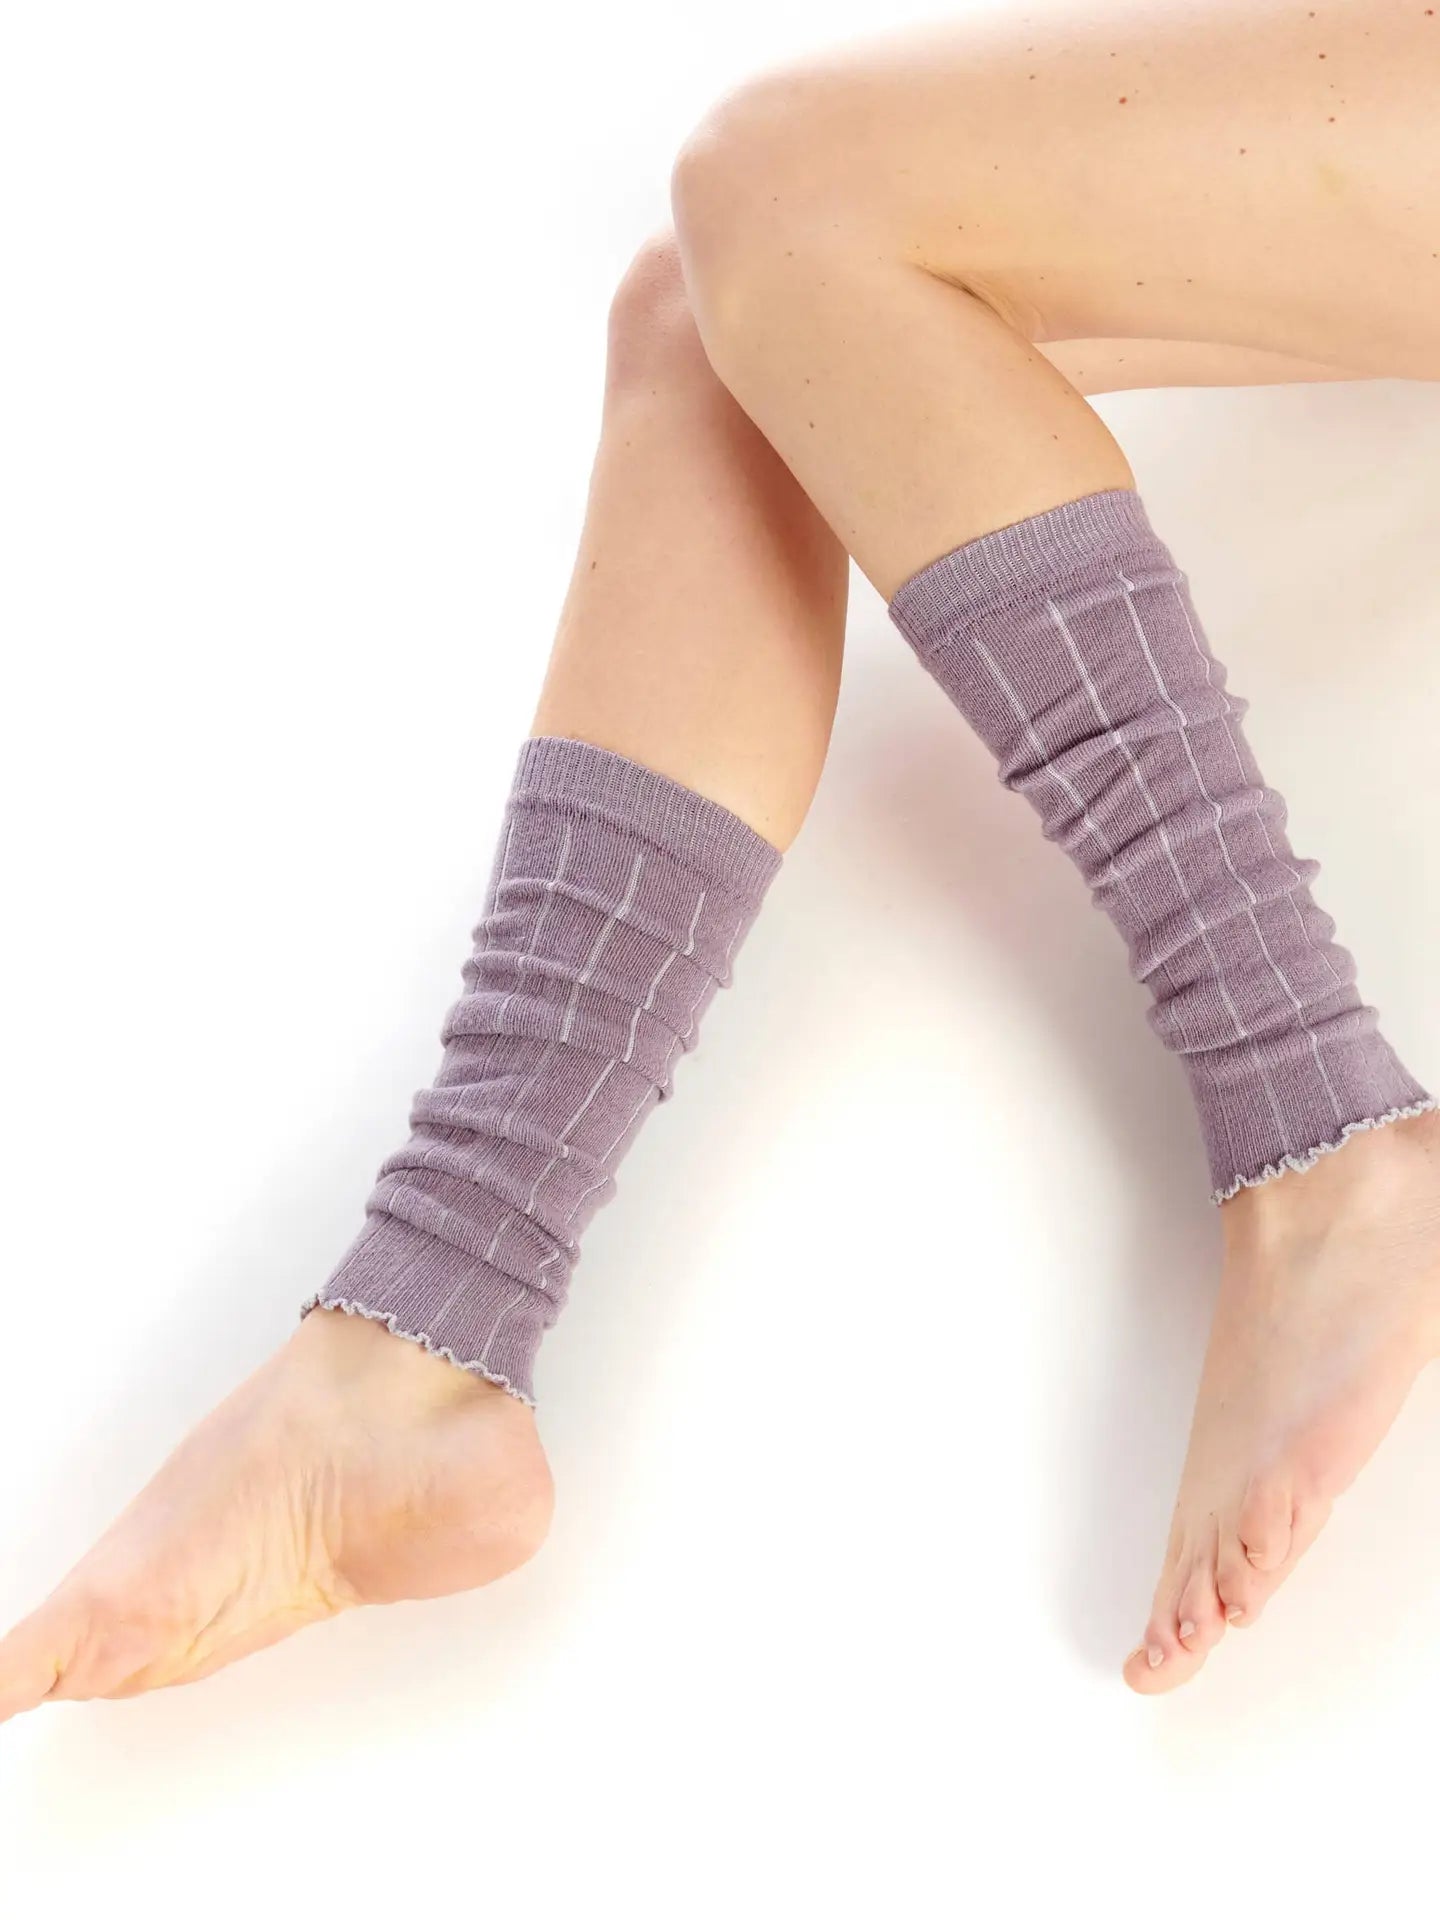 Cashmere Leg Warmers in Mauve - The Sockery